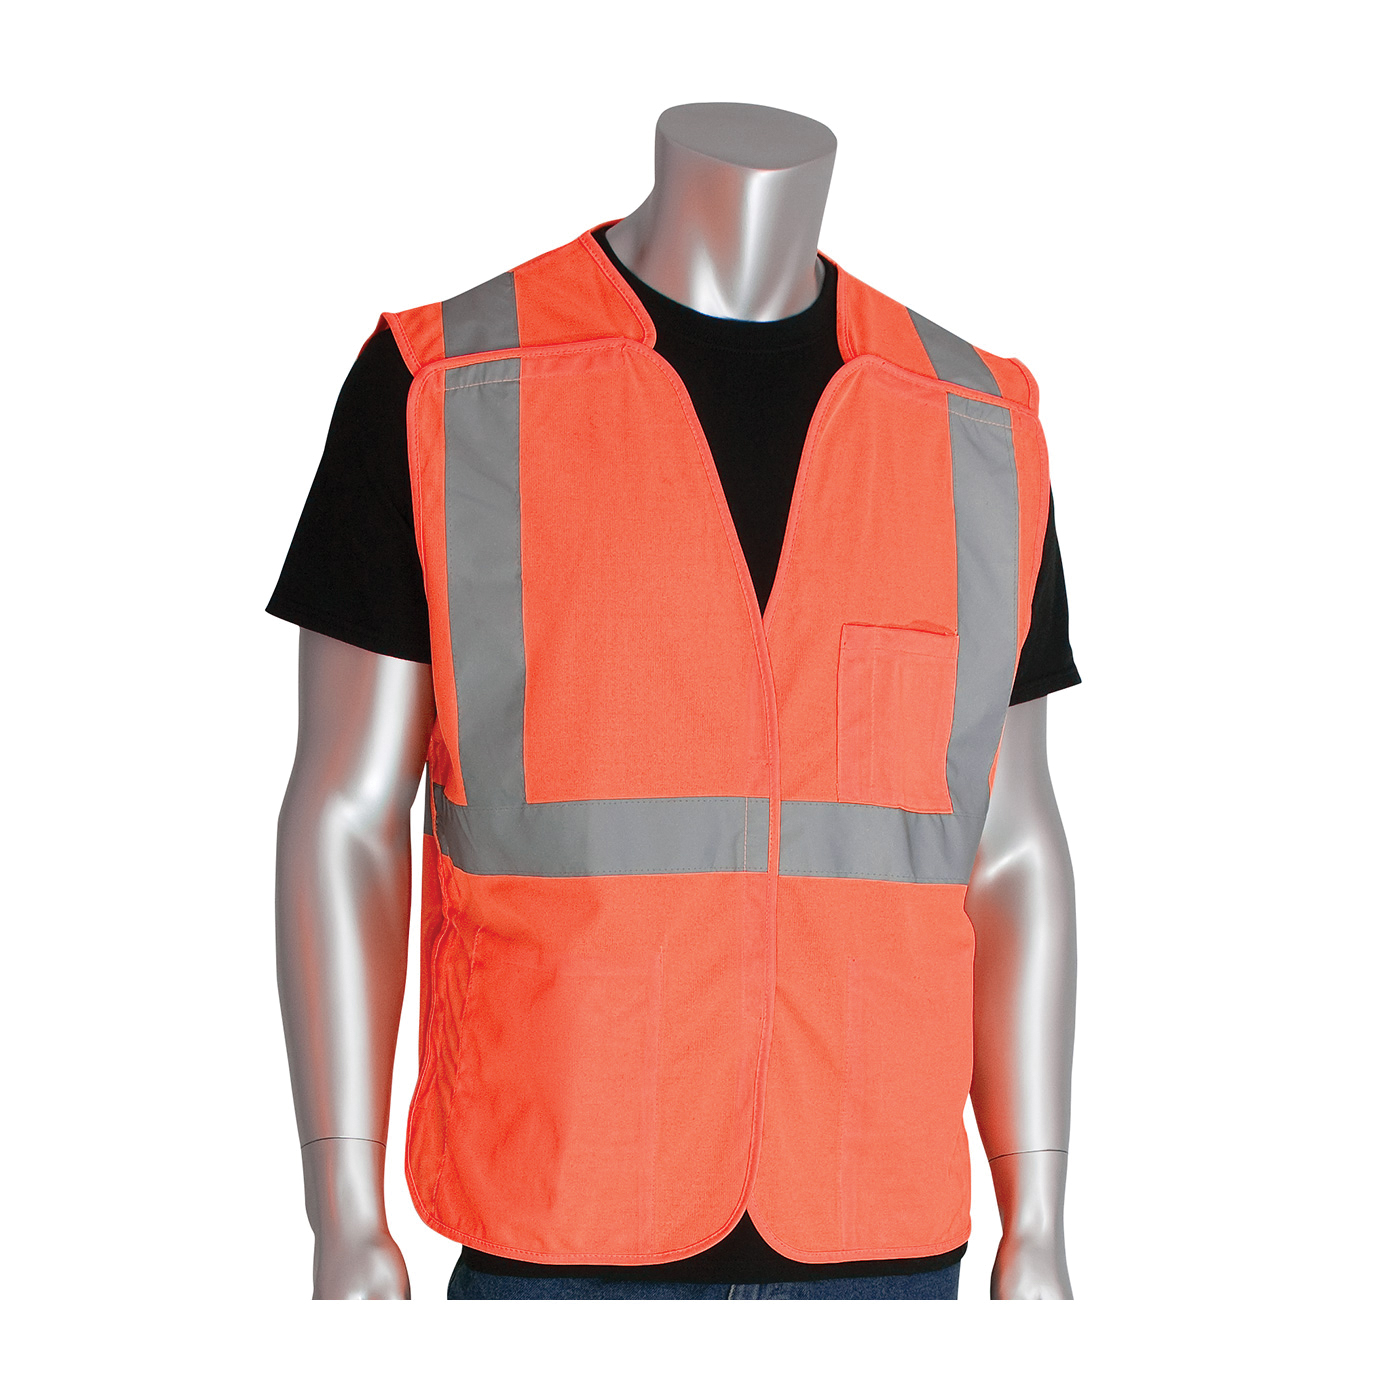 PIP® 302-5PVOR-XL Safety Vest, XL, Hi-Viz Orange, Polyester, Hook and Loop Closure, 3 Pockets, ANSI Class: Class 2, Specifications Met: ANSI 107 Type R